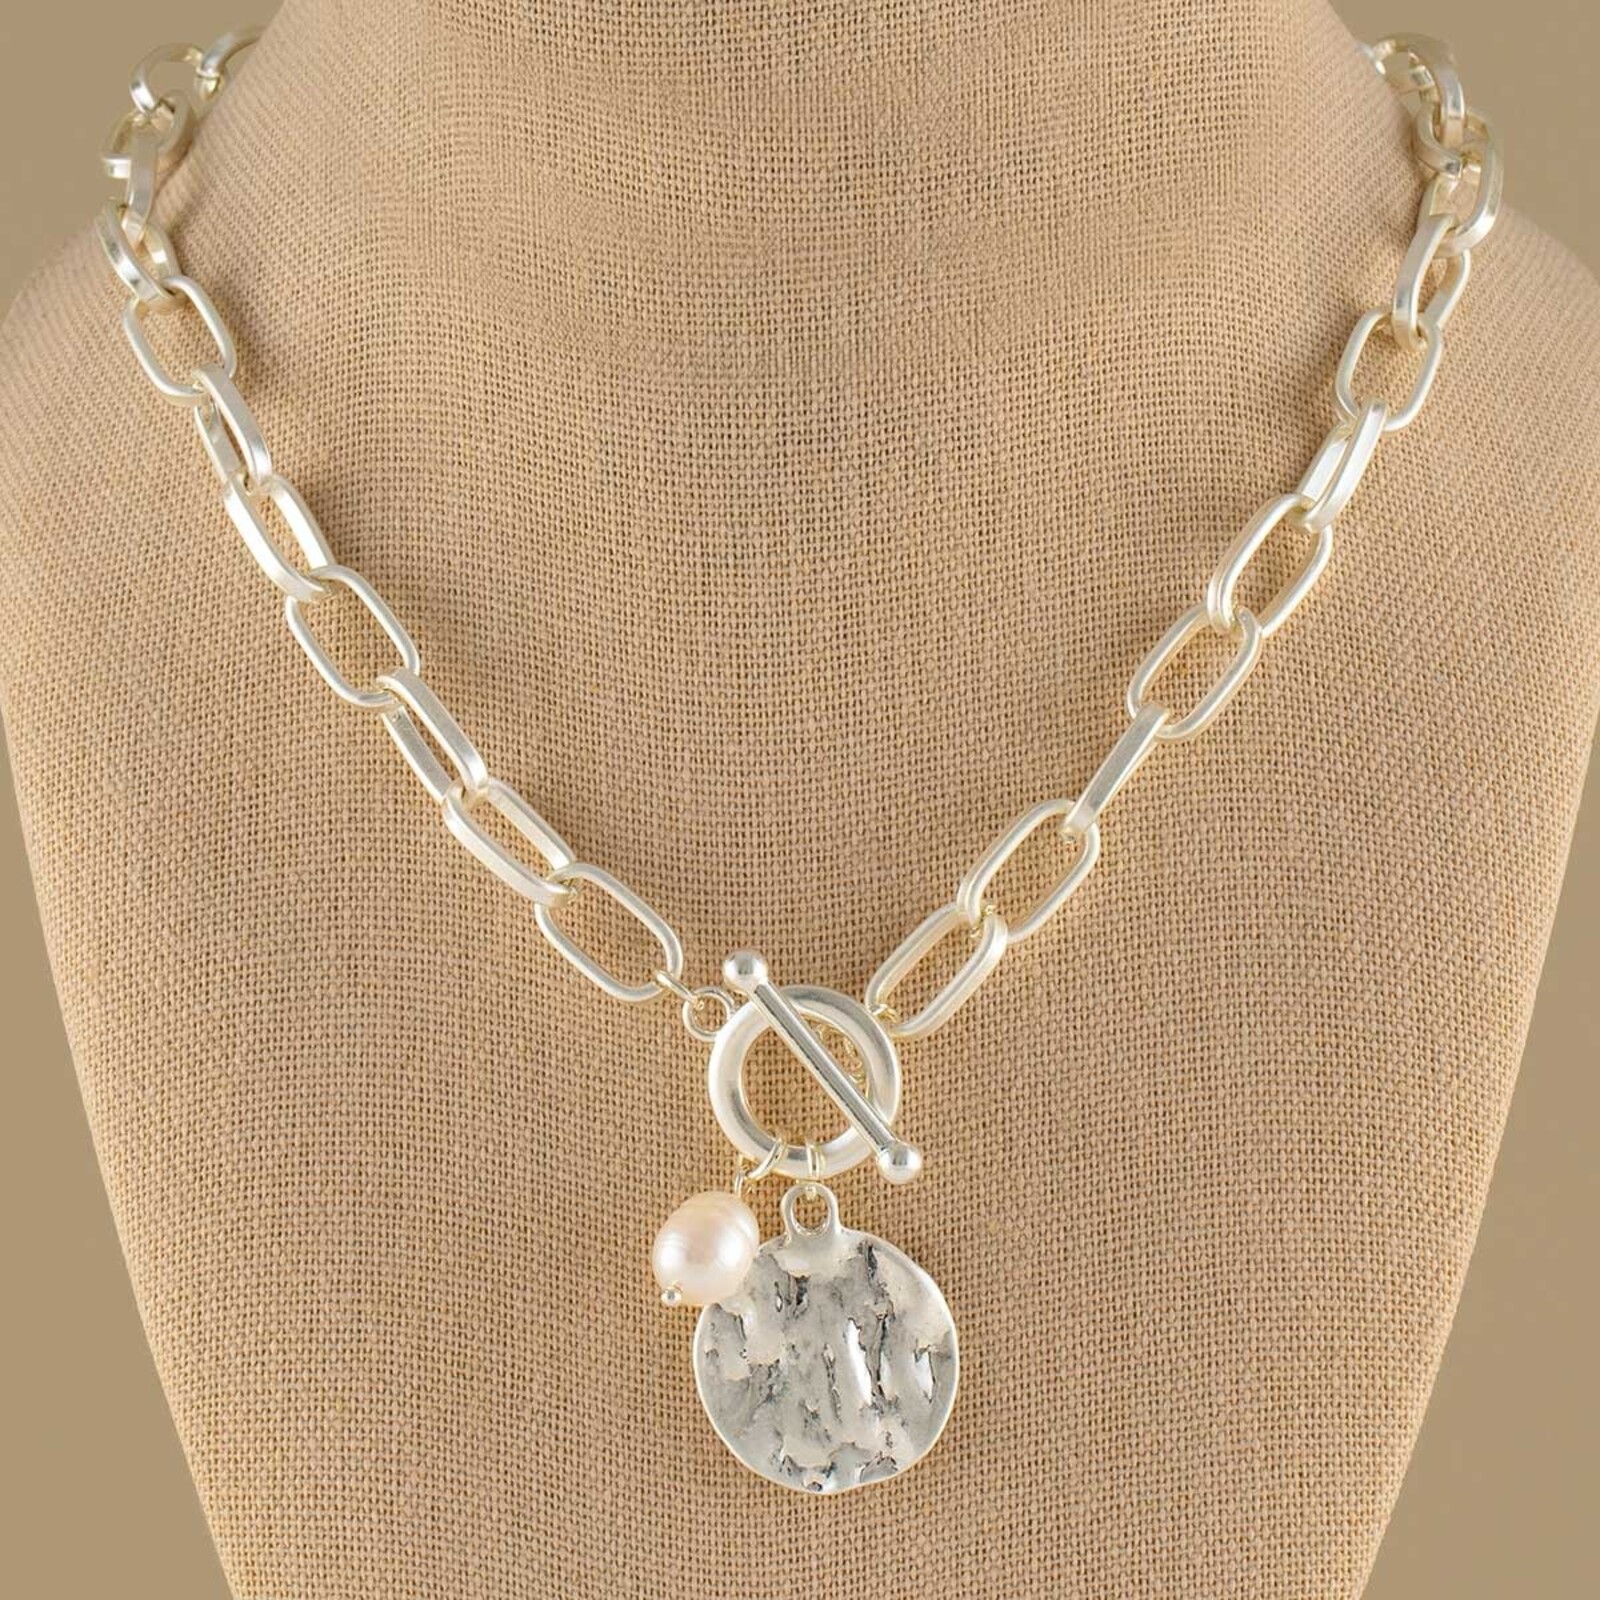 Meravic NECKLACE LINKS CIRCLE PEARL SILVER TOGGLE    C3320 loading=